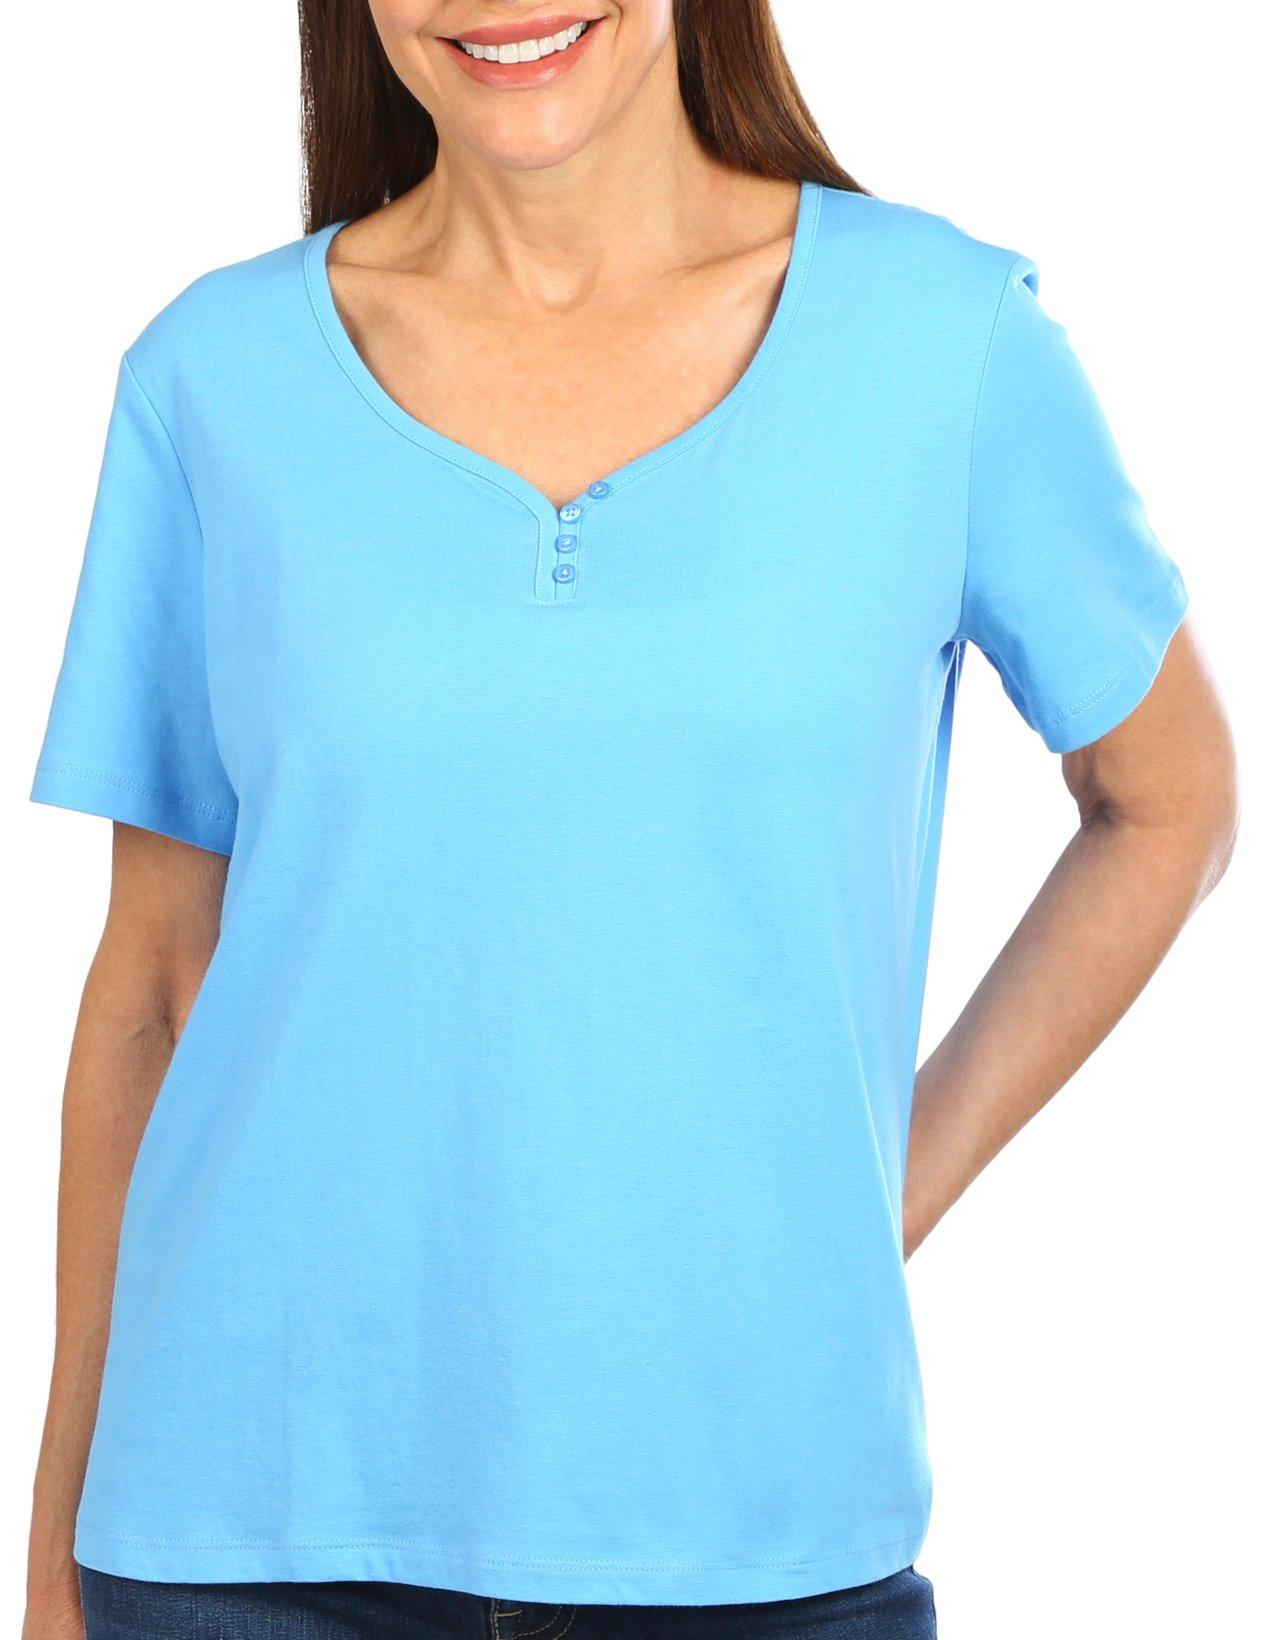 Coral Bay Petite Short Sleeve Decorative Button Top